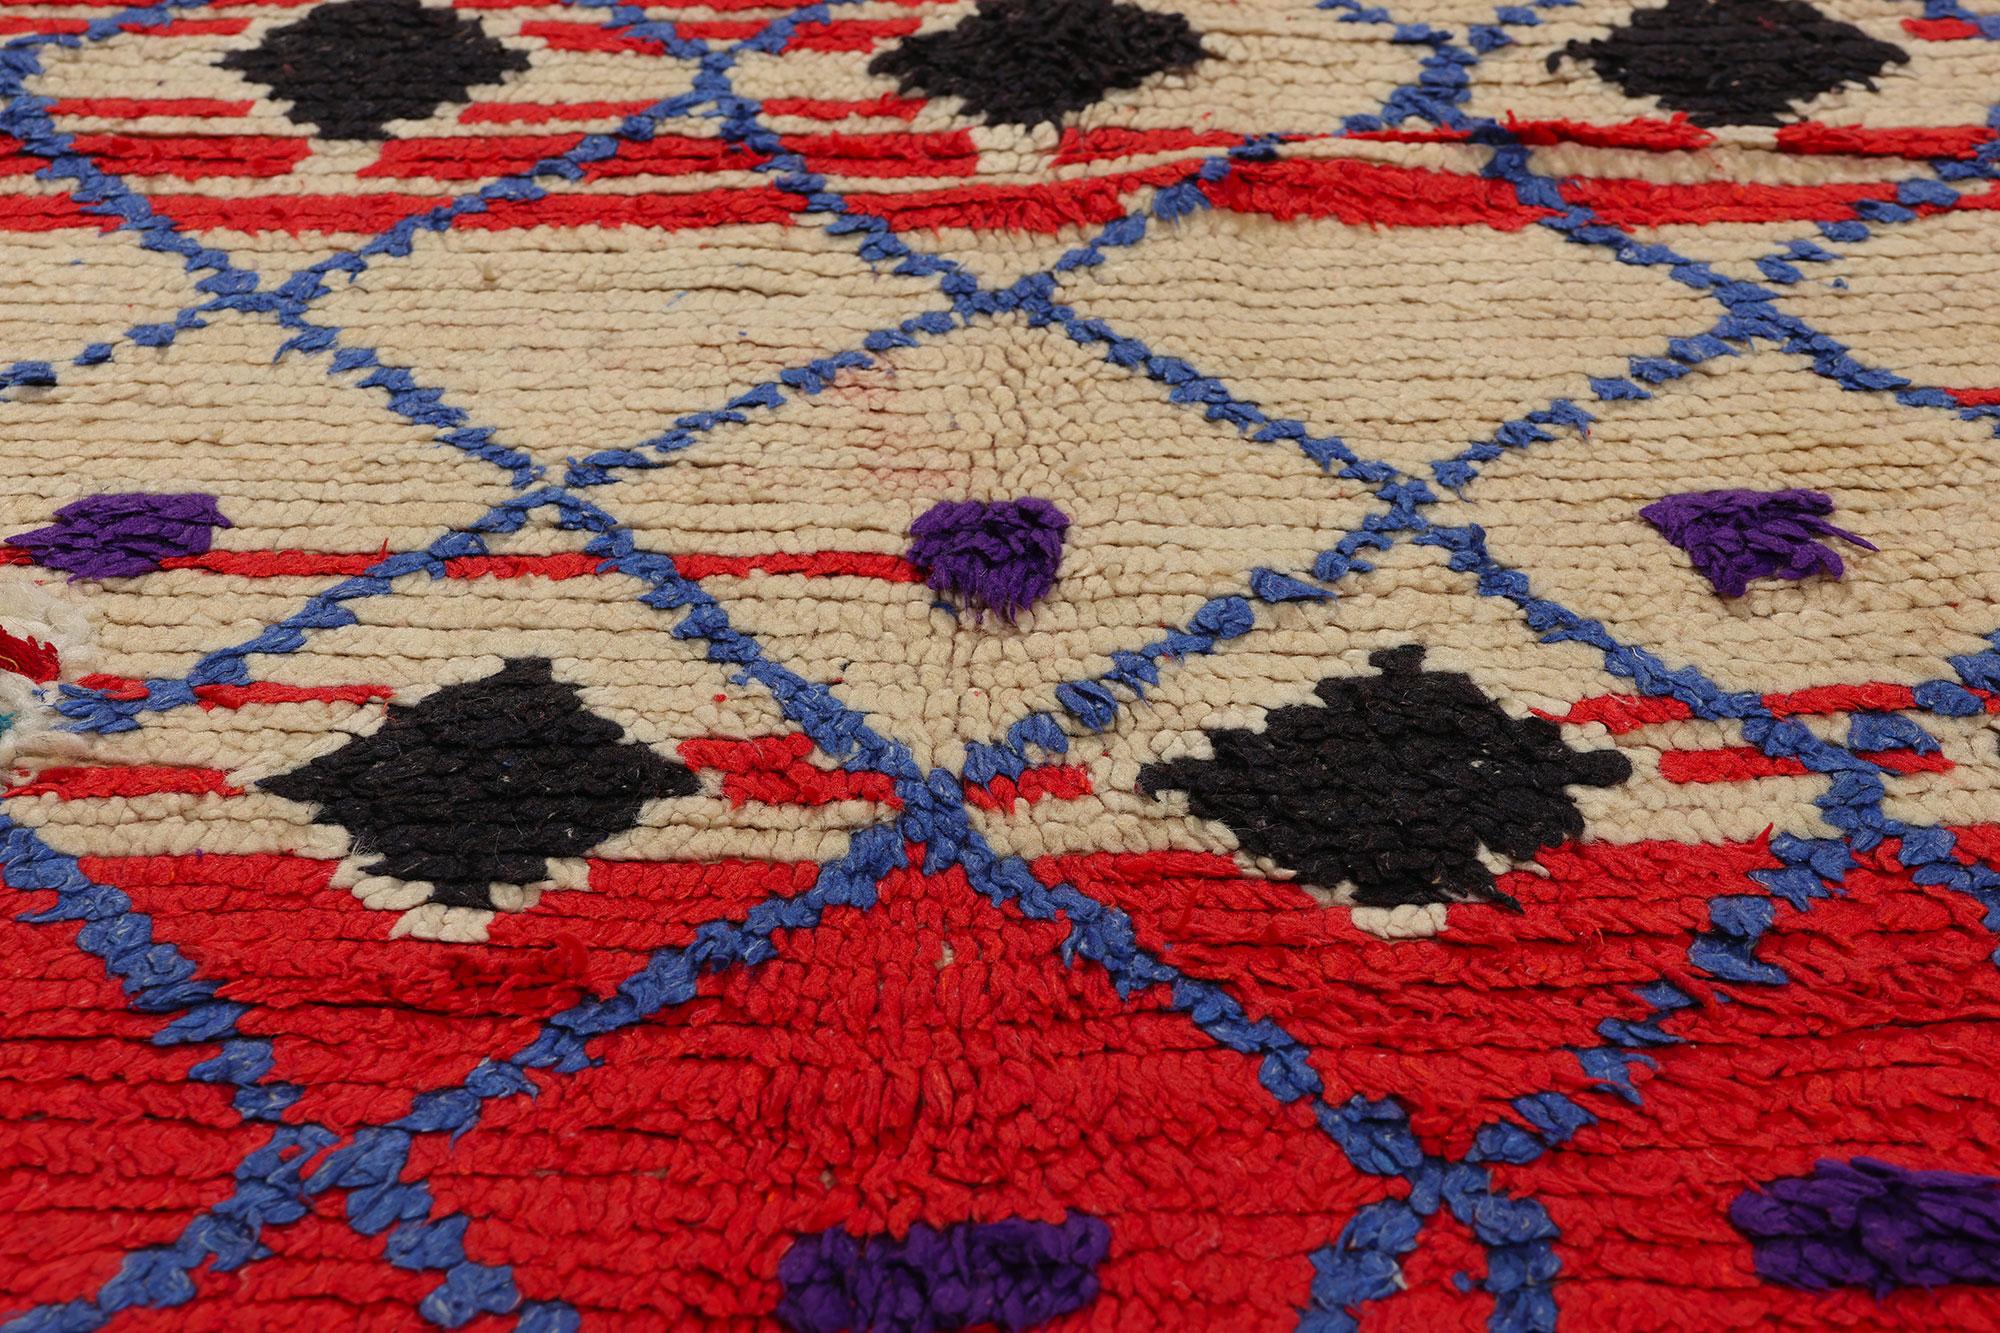 Vintage Berber Moroccan Azilal Rug, Boho Chic Meets Tribal Enchantment In Good Condition For Sale In Dallas, TX